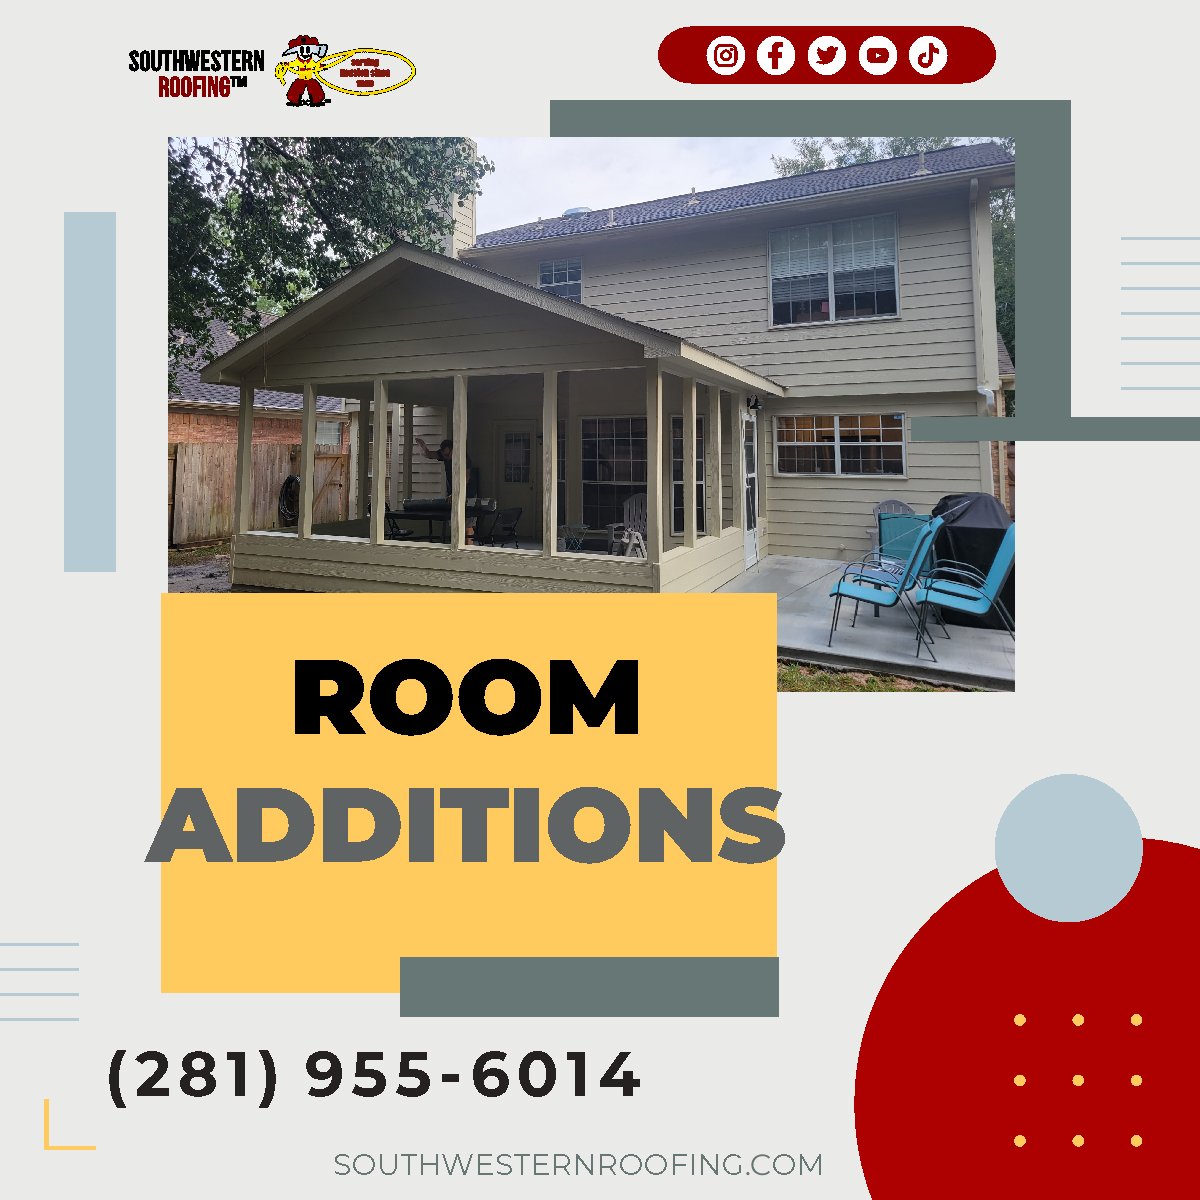 ✨ Transform your space with the magic of Room Additions by Southwestern Roofing! ✨ Our expert team turns dreams into reality. 🏡✨ From cozy corners to expansive extensions, we've got you covered!

🔨 #HomeMakeover #RoomAdditions #DreamSpace #InteriorDesignInspo #Southweste ...